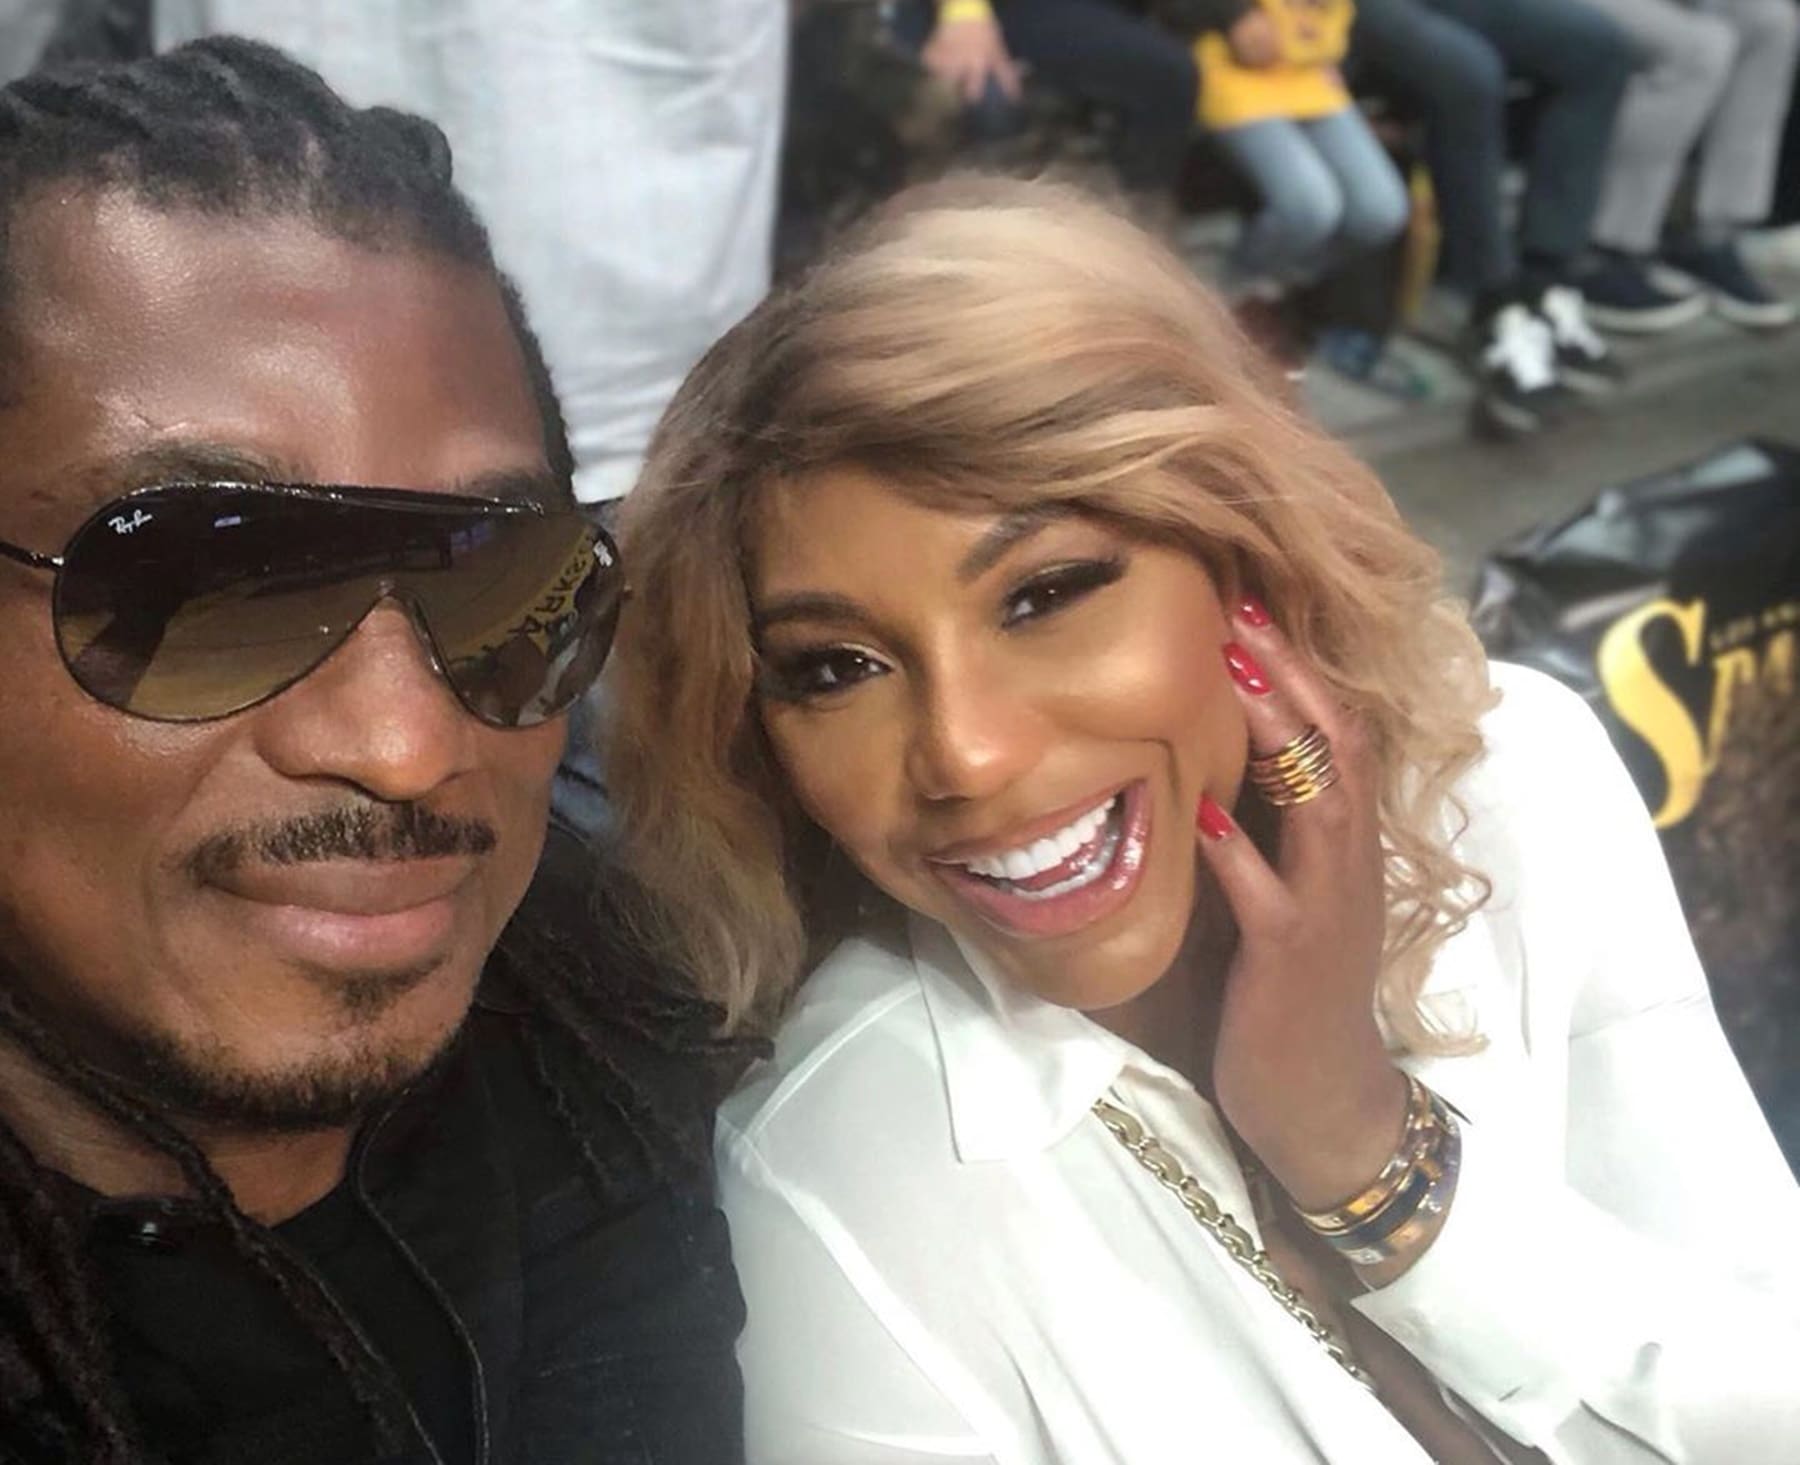 ”tamar-braxton-and-david-adefesos-latest-video-was-filmed-in-the-back-of-a-car-will-it-lead-to-baby-number-2”